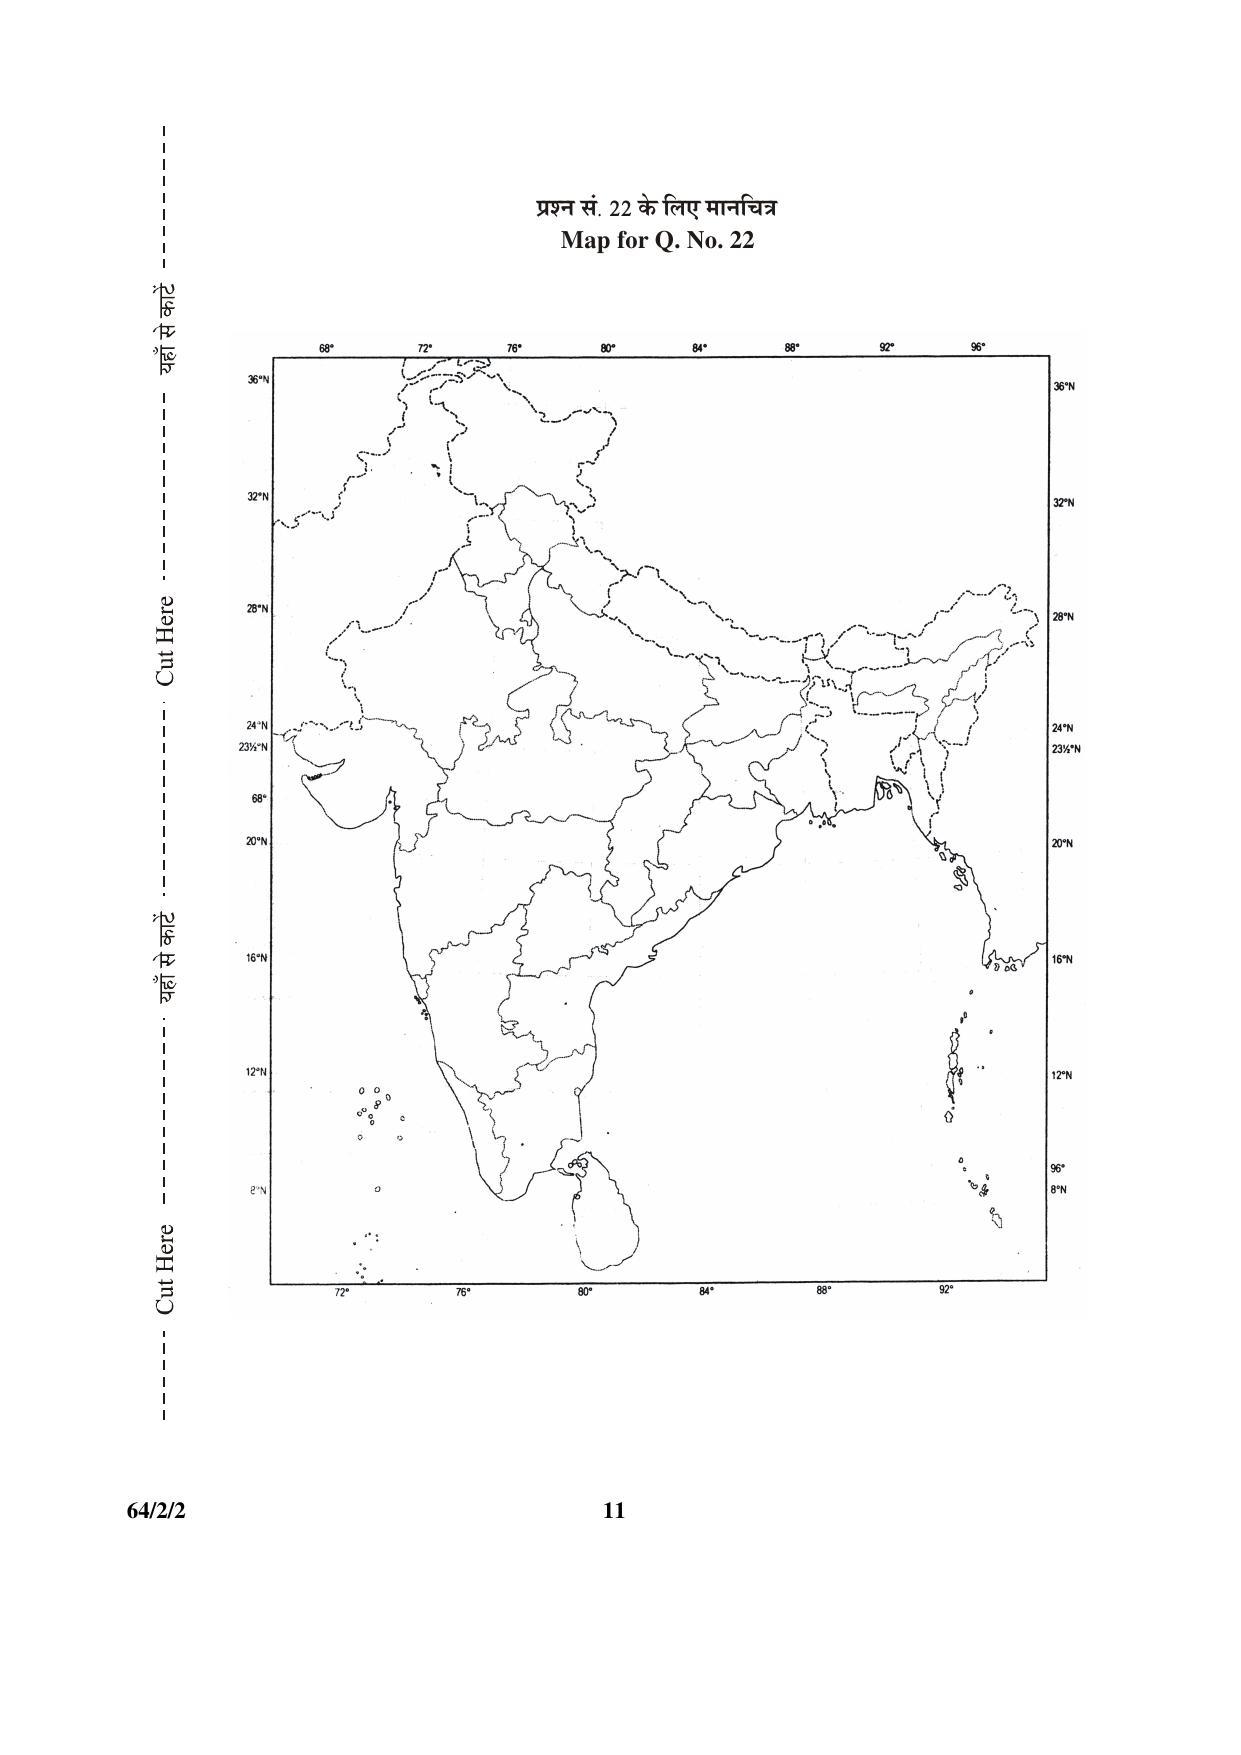 CBSE Class 12 64-2-2 Geography 2016 Question Paper - Page 11